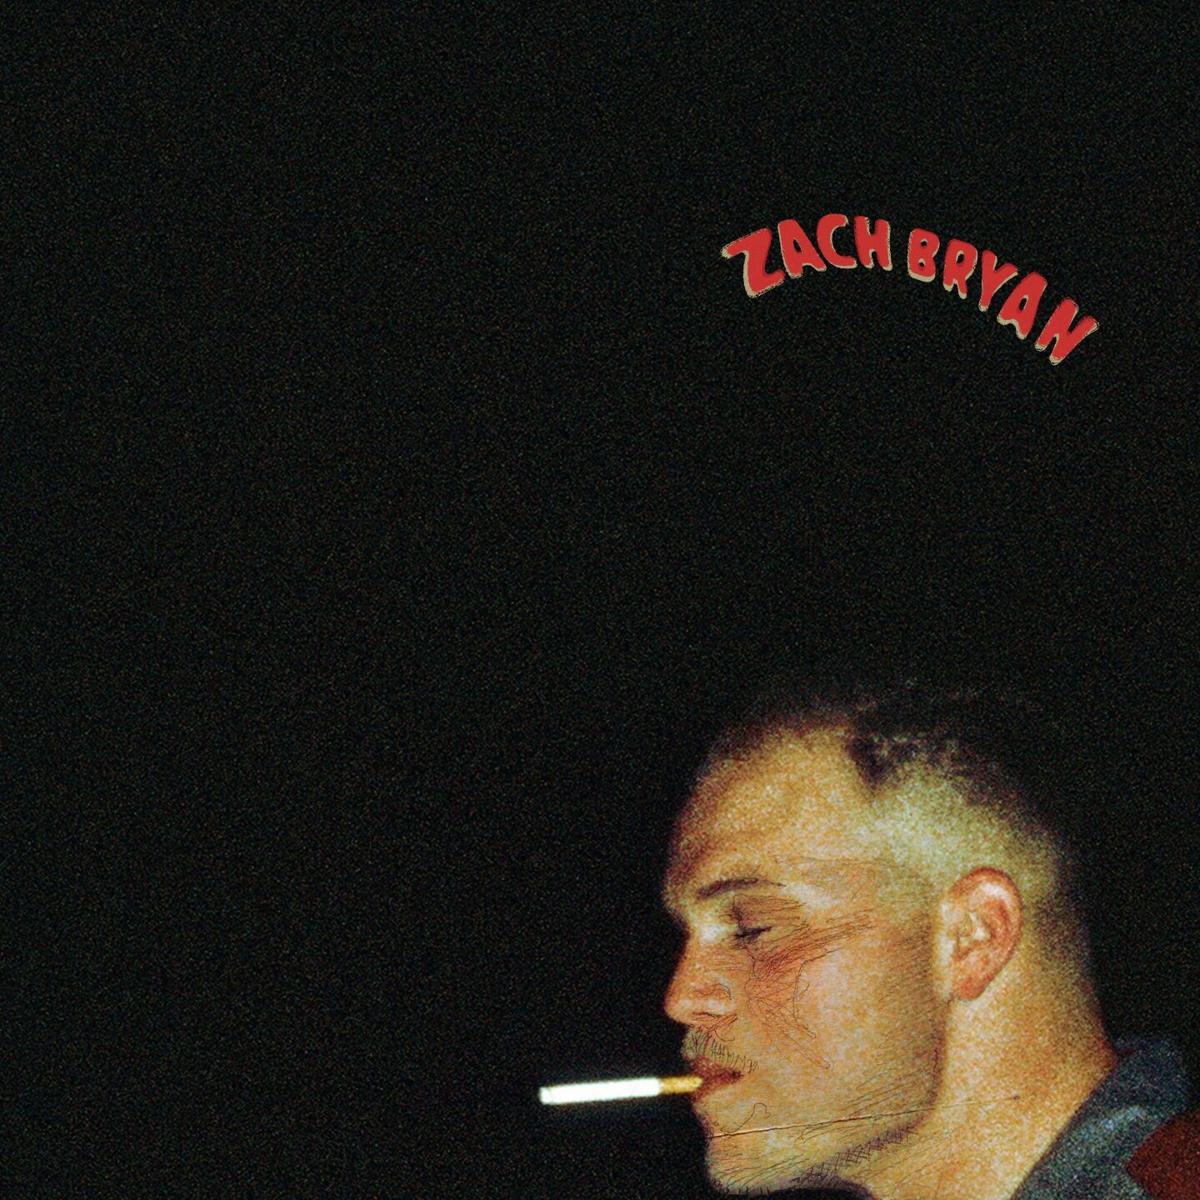 The album cover for Zach Bryan by Zach Bryan. Used with permission/Warner Records.